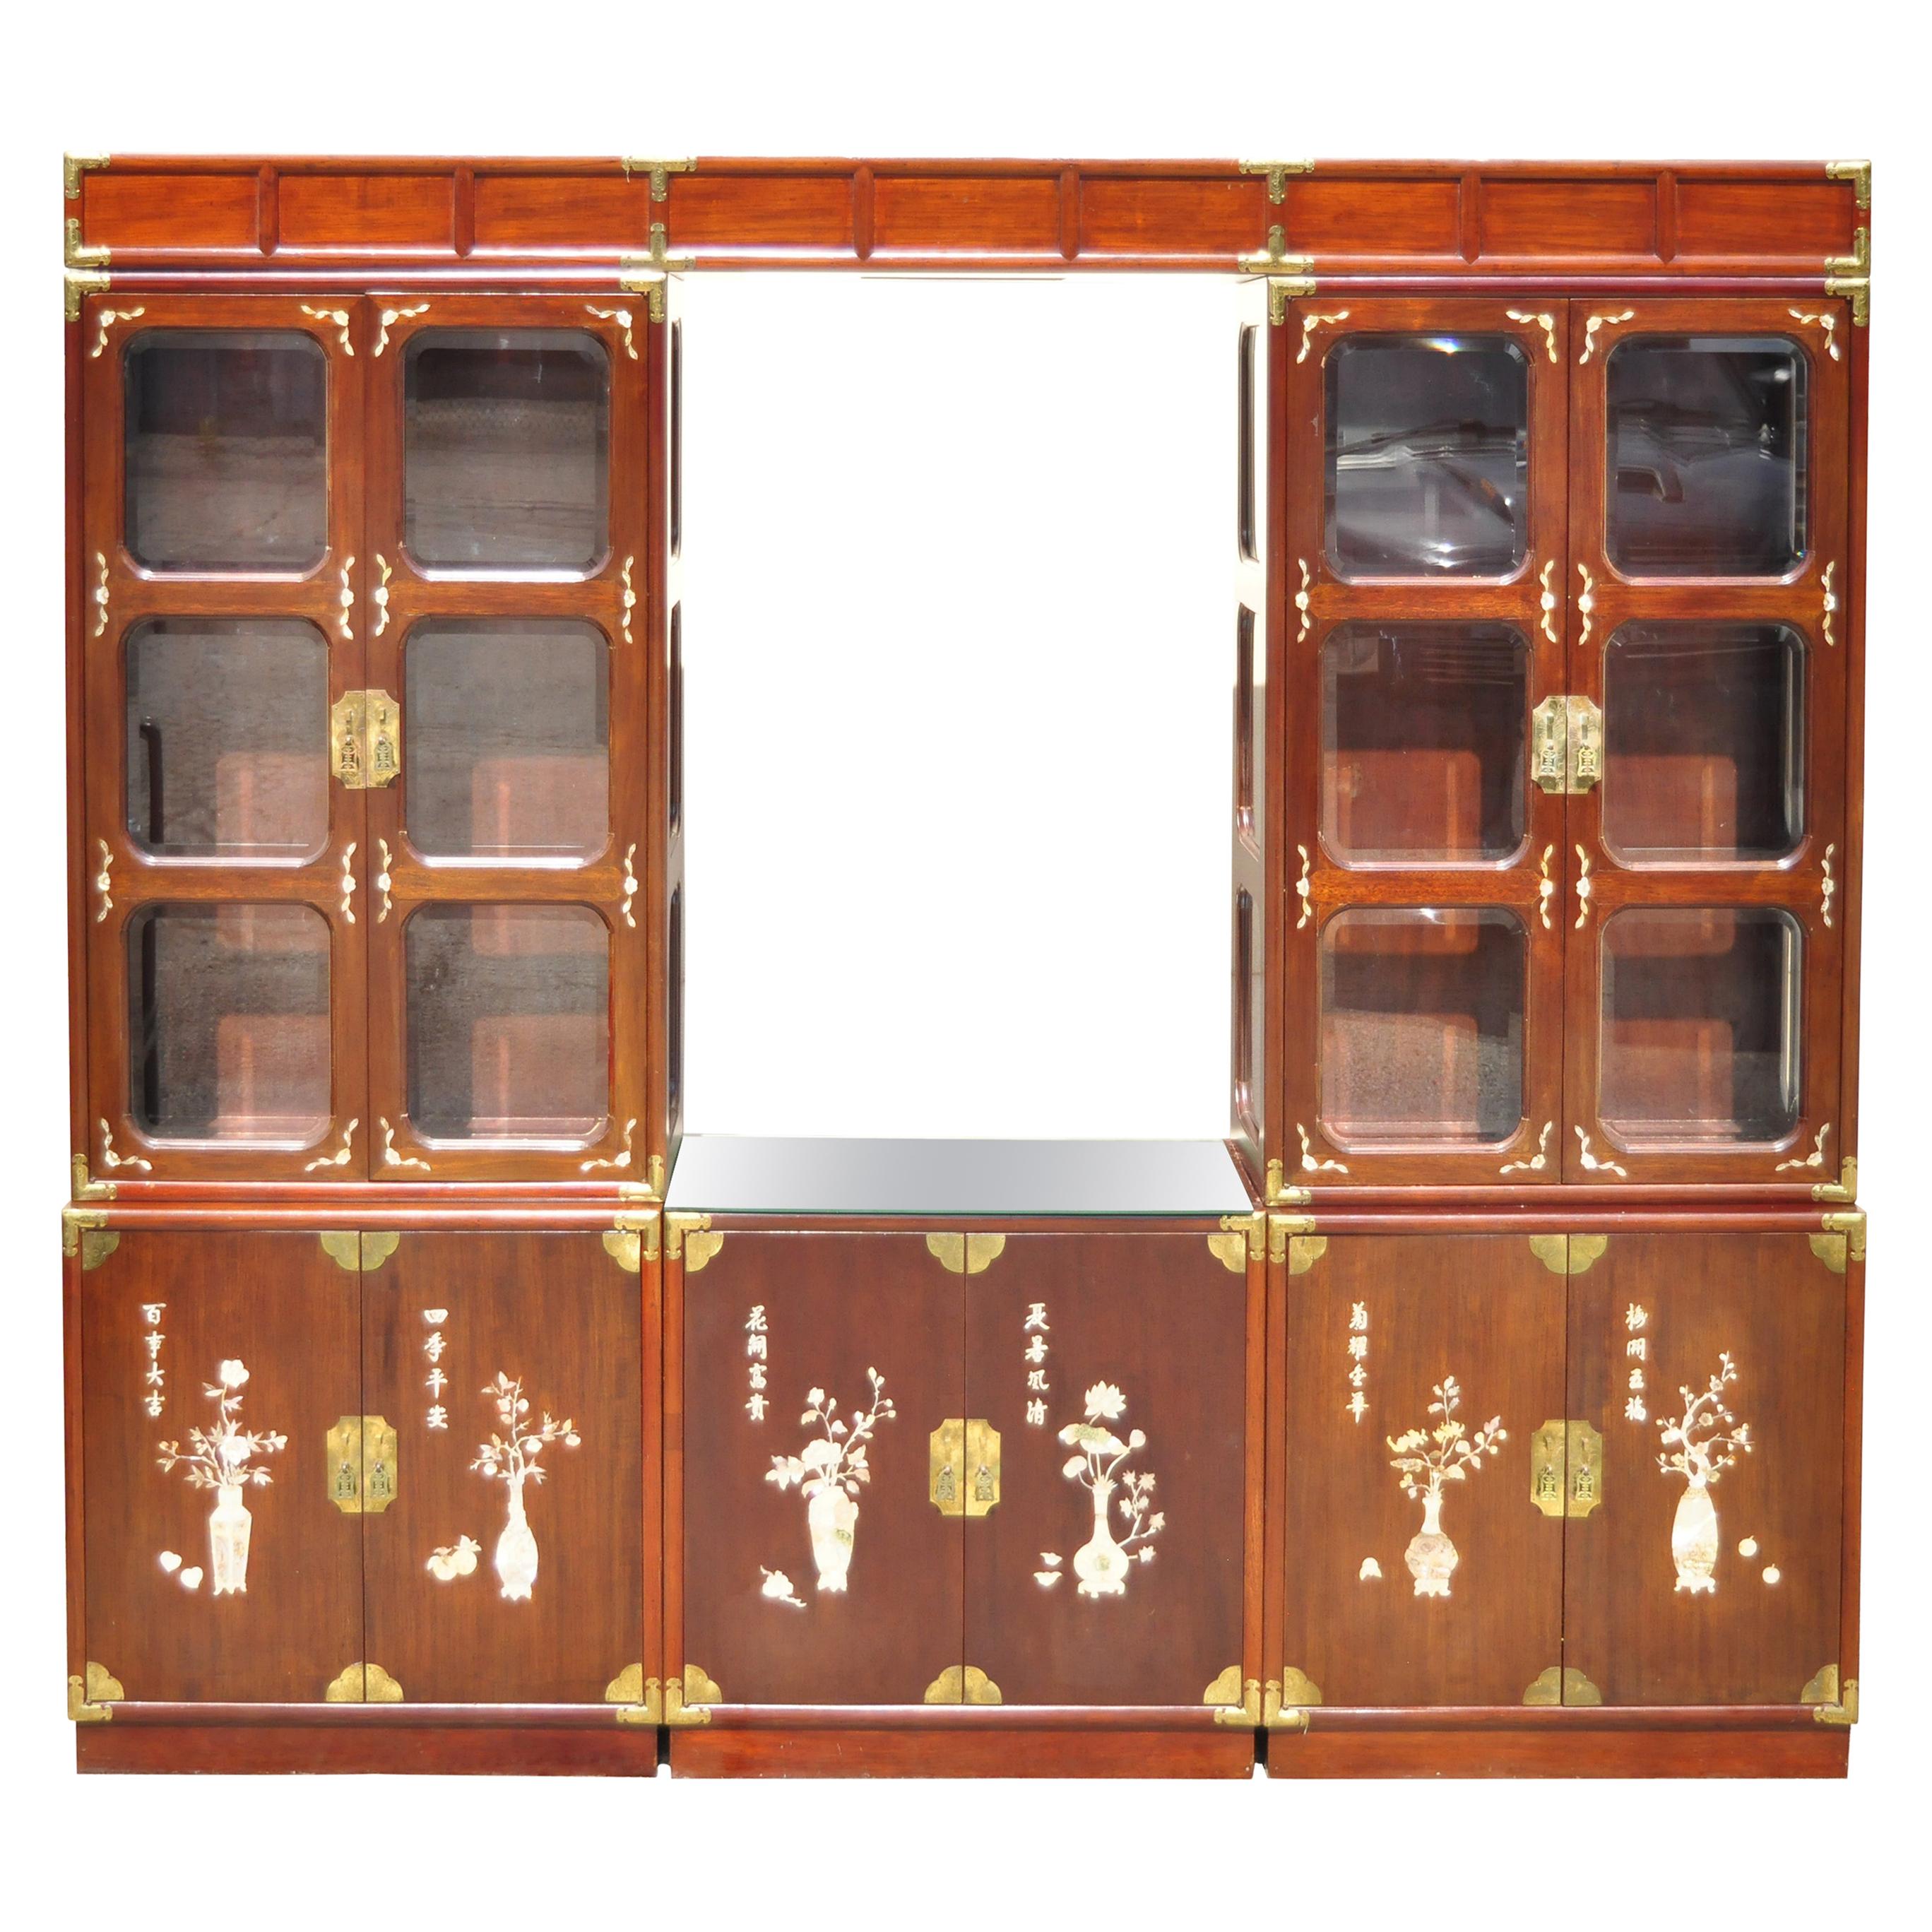 Asian Mother of Pearl Rosewood Cherry Lg China Cabinet Curio Display Wall Unit For Sale